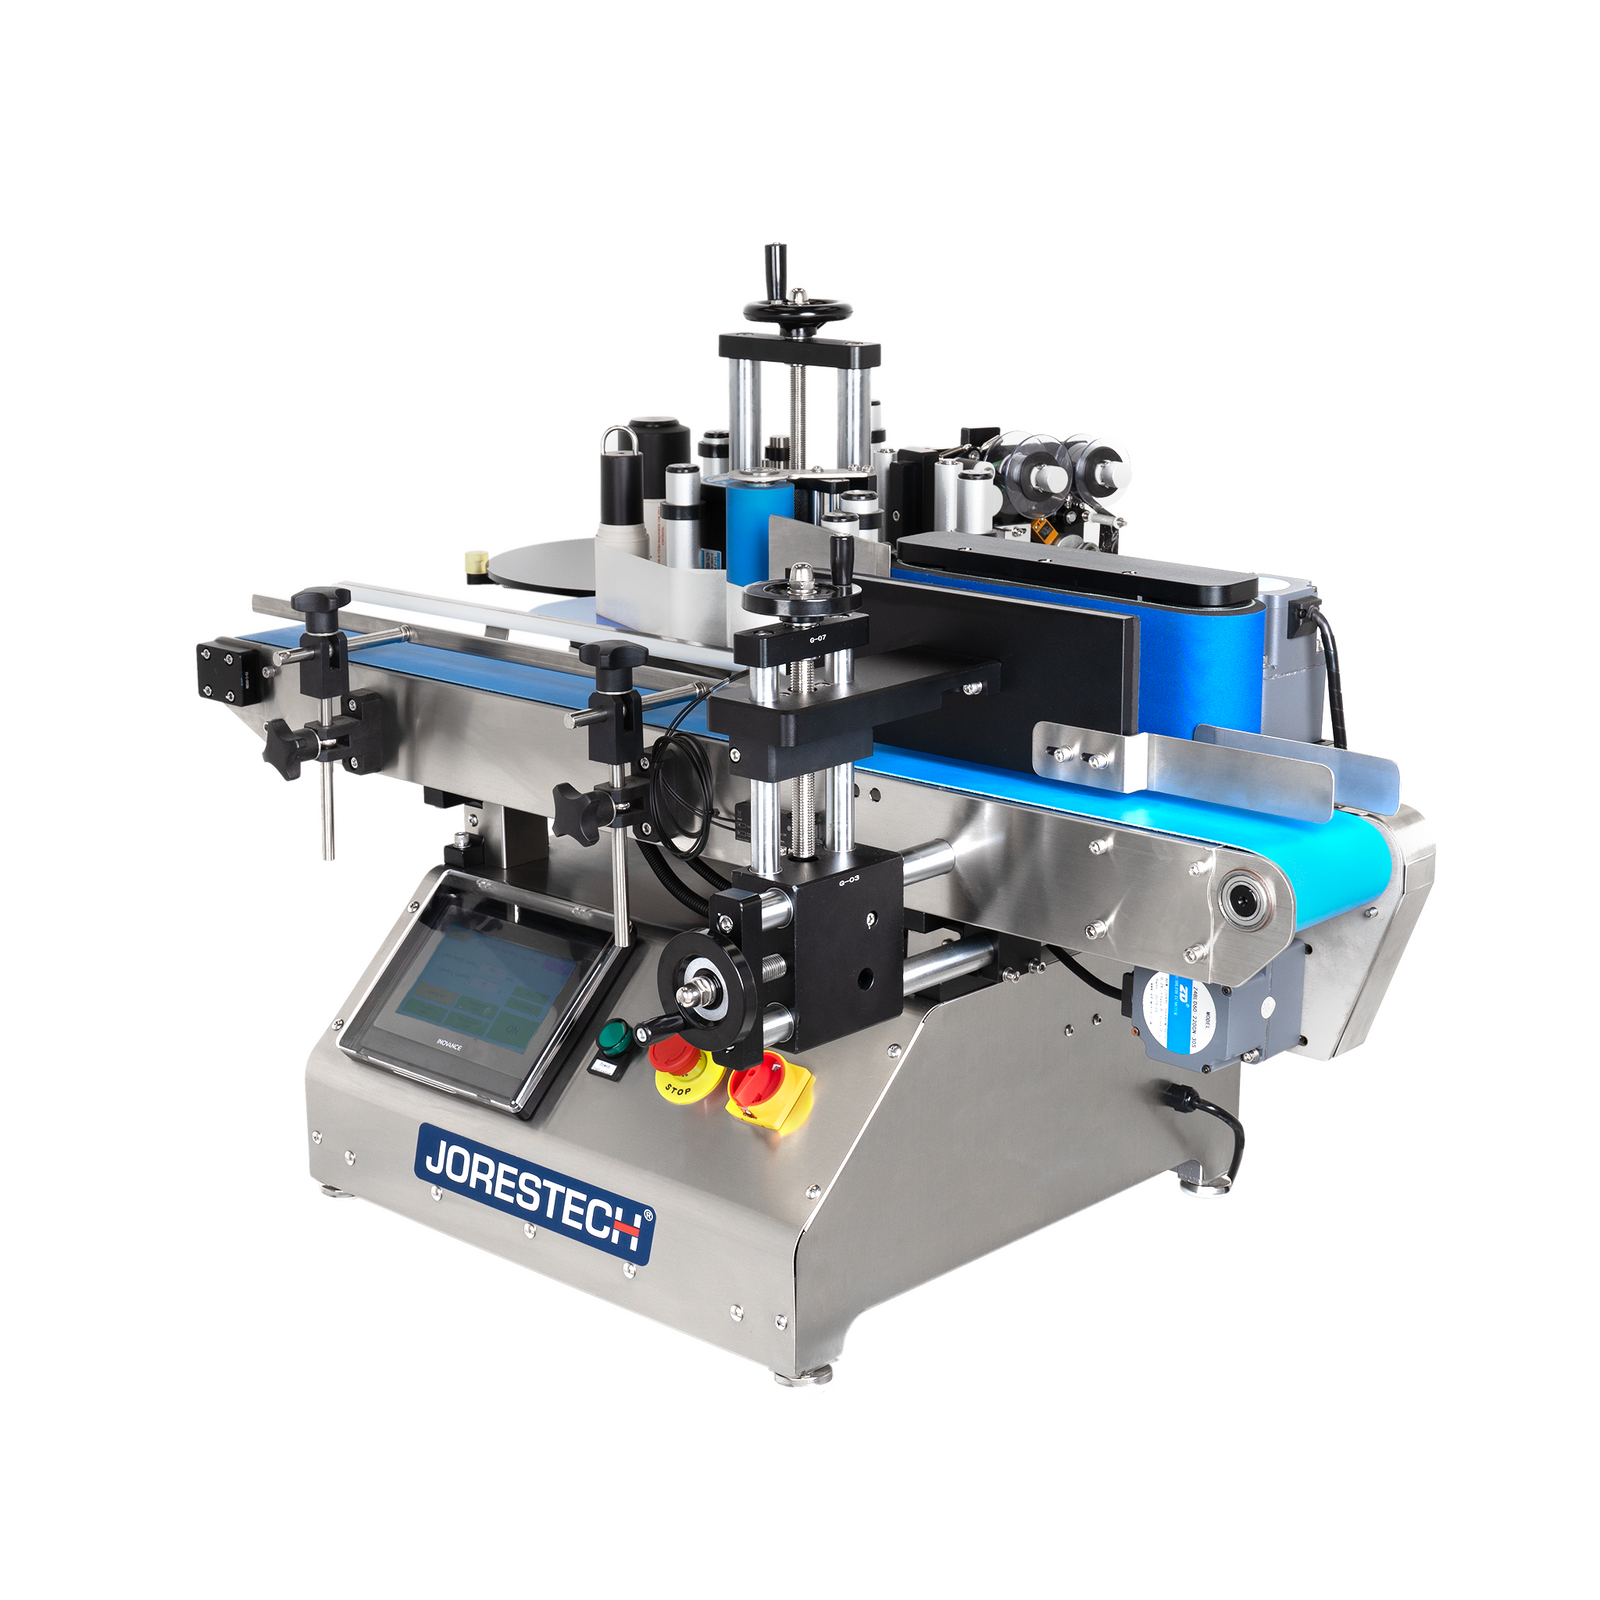 Table top automatic label applicator with conveyor and coder for round containers